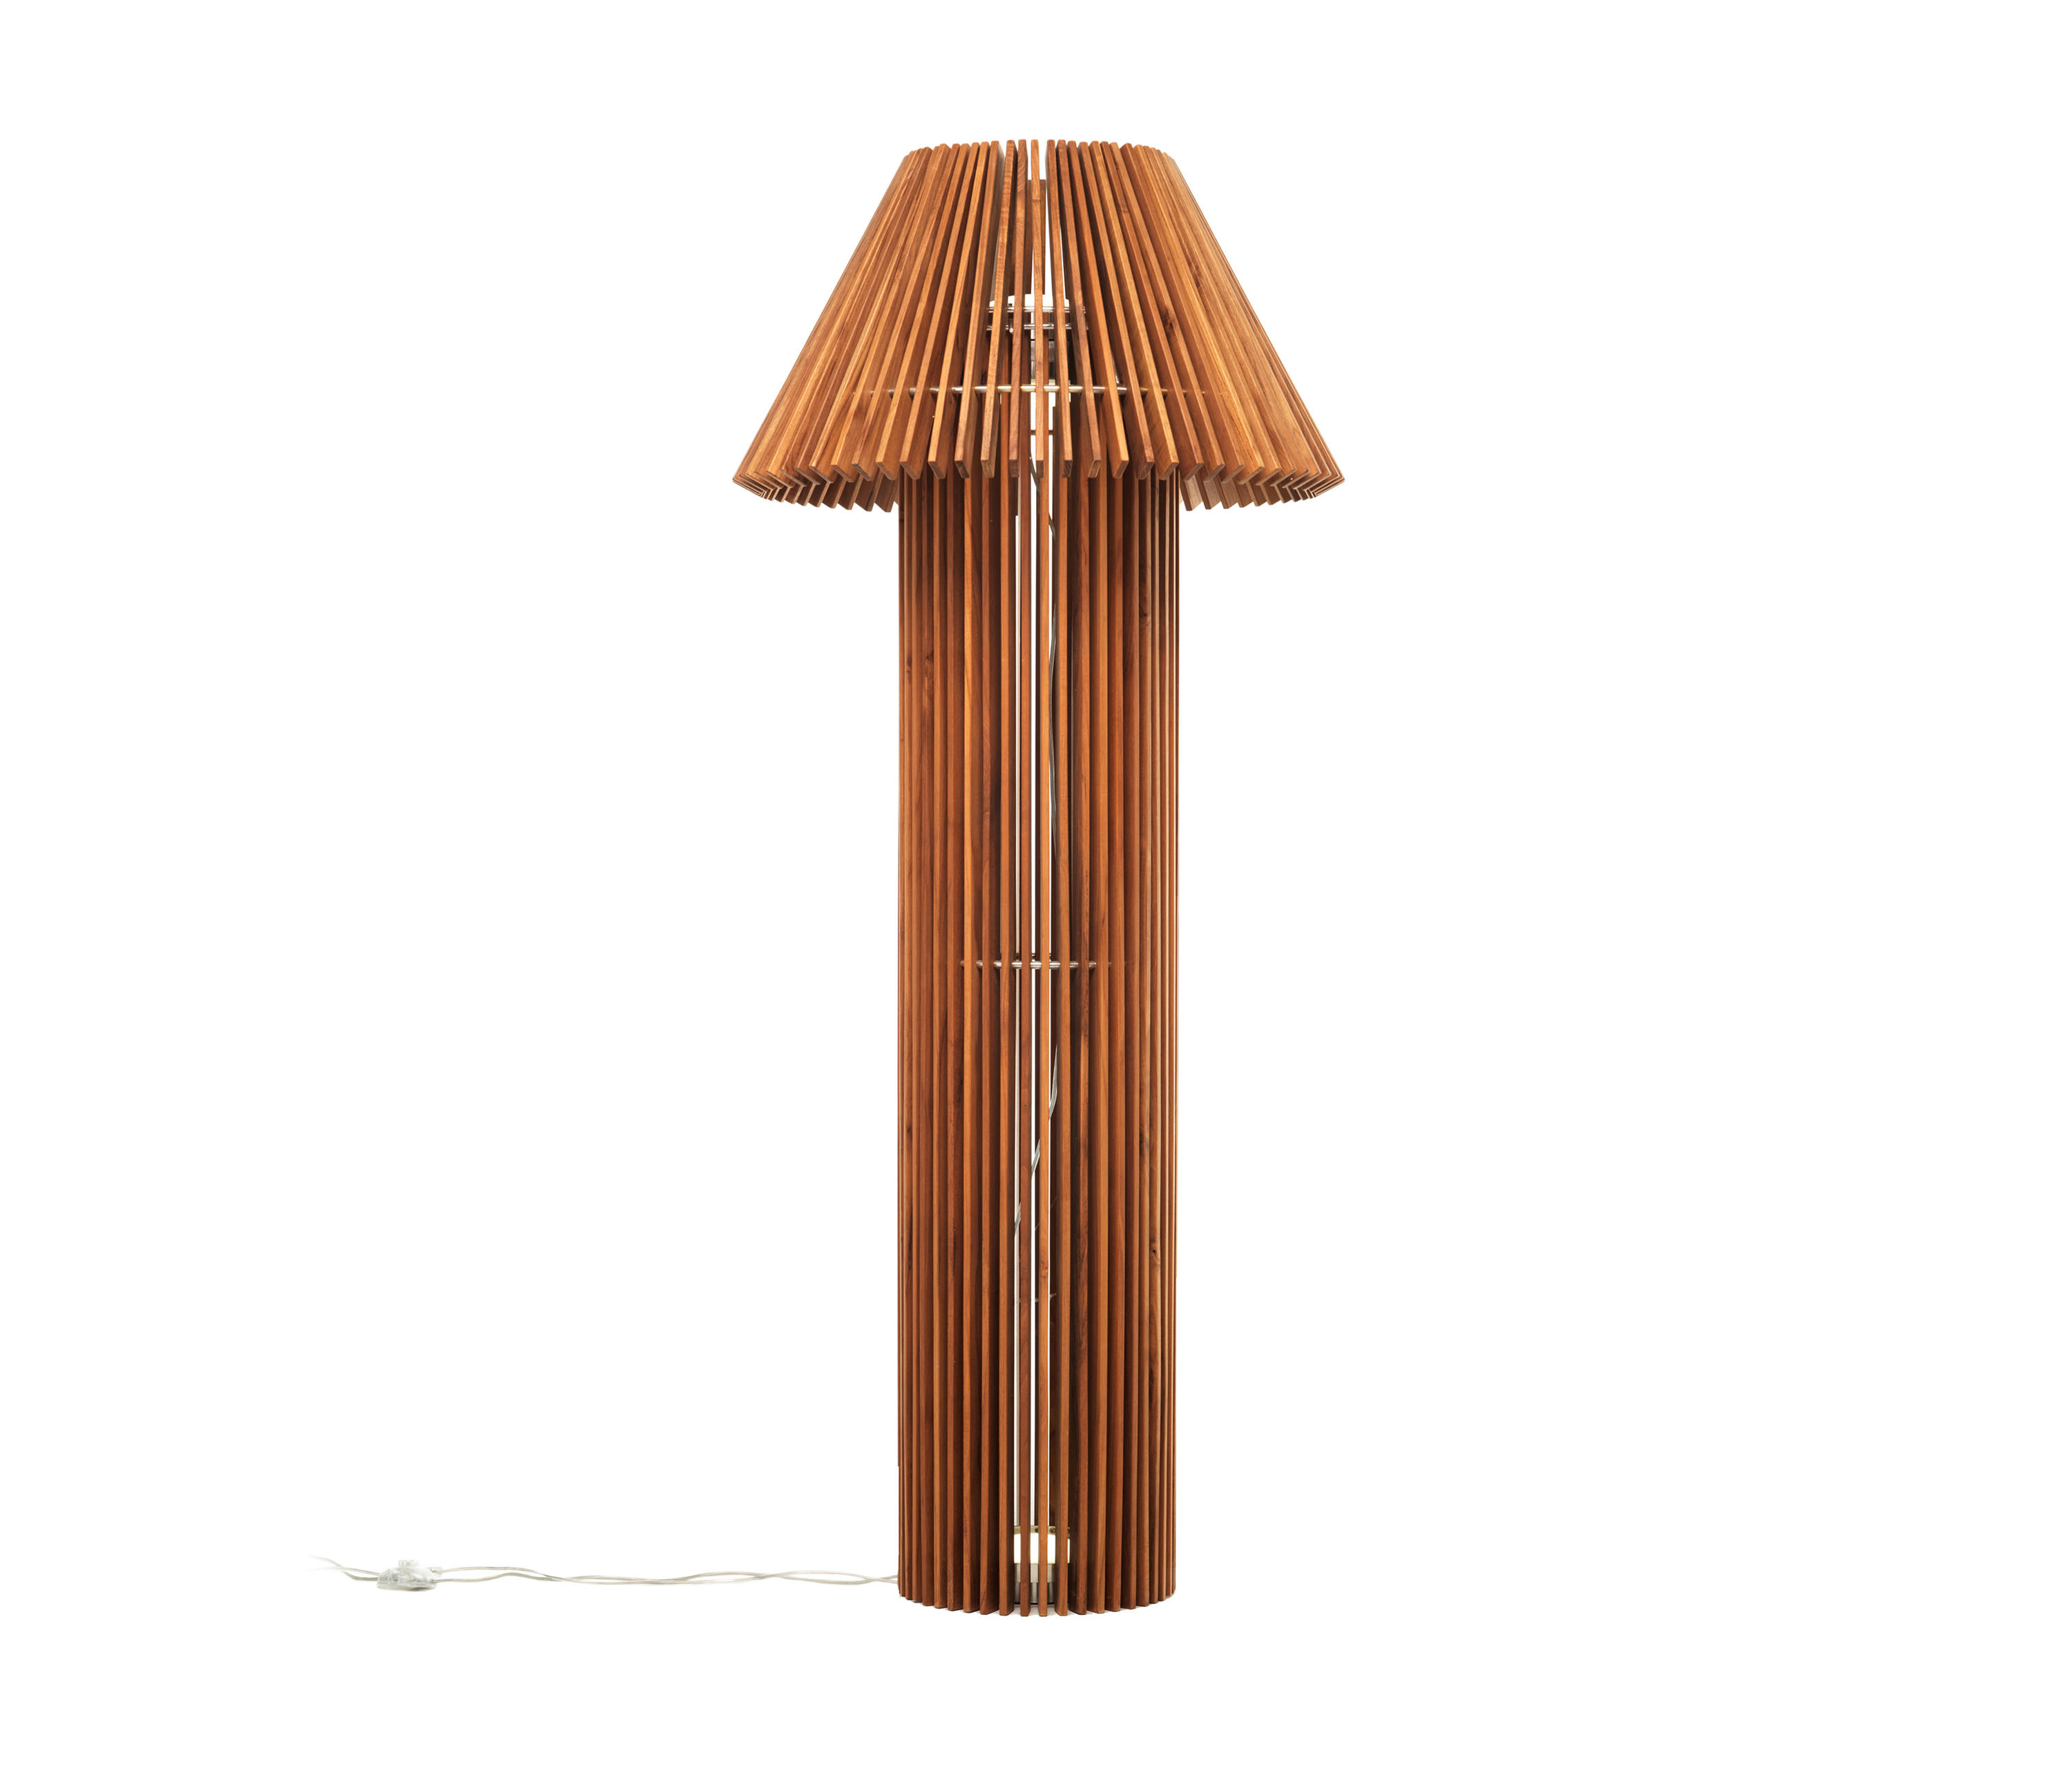 Wood Floor Lamp Designermbel Architonic intended for sizing 3000 X 2564